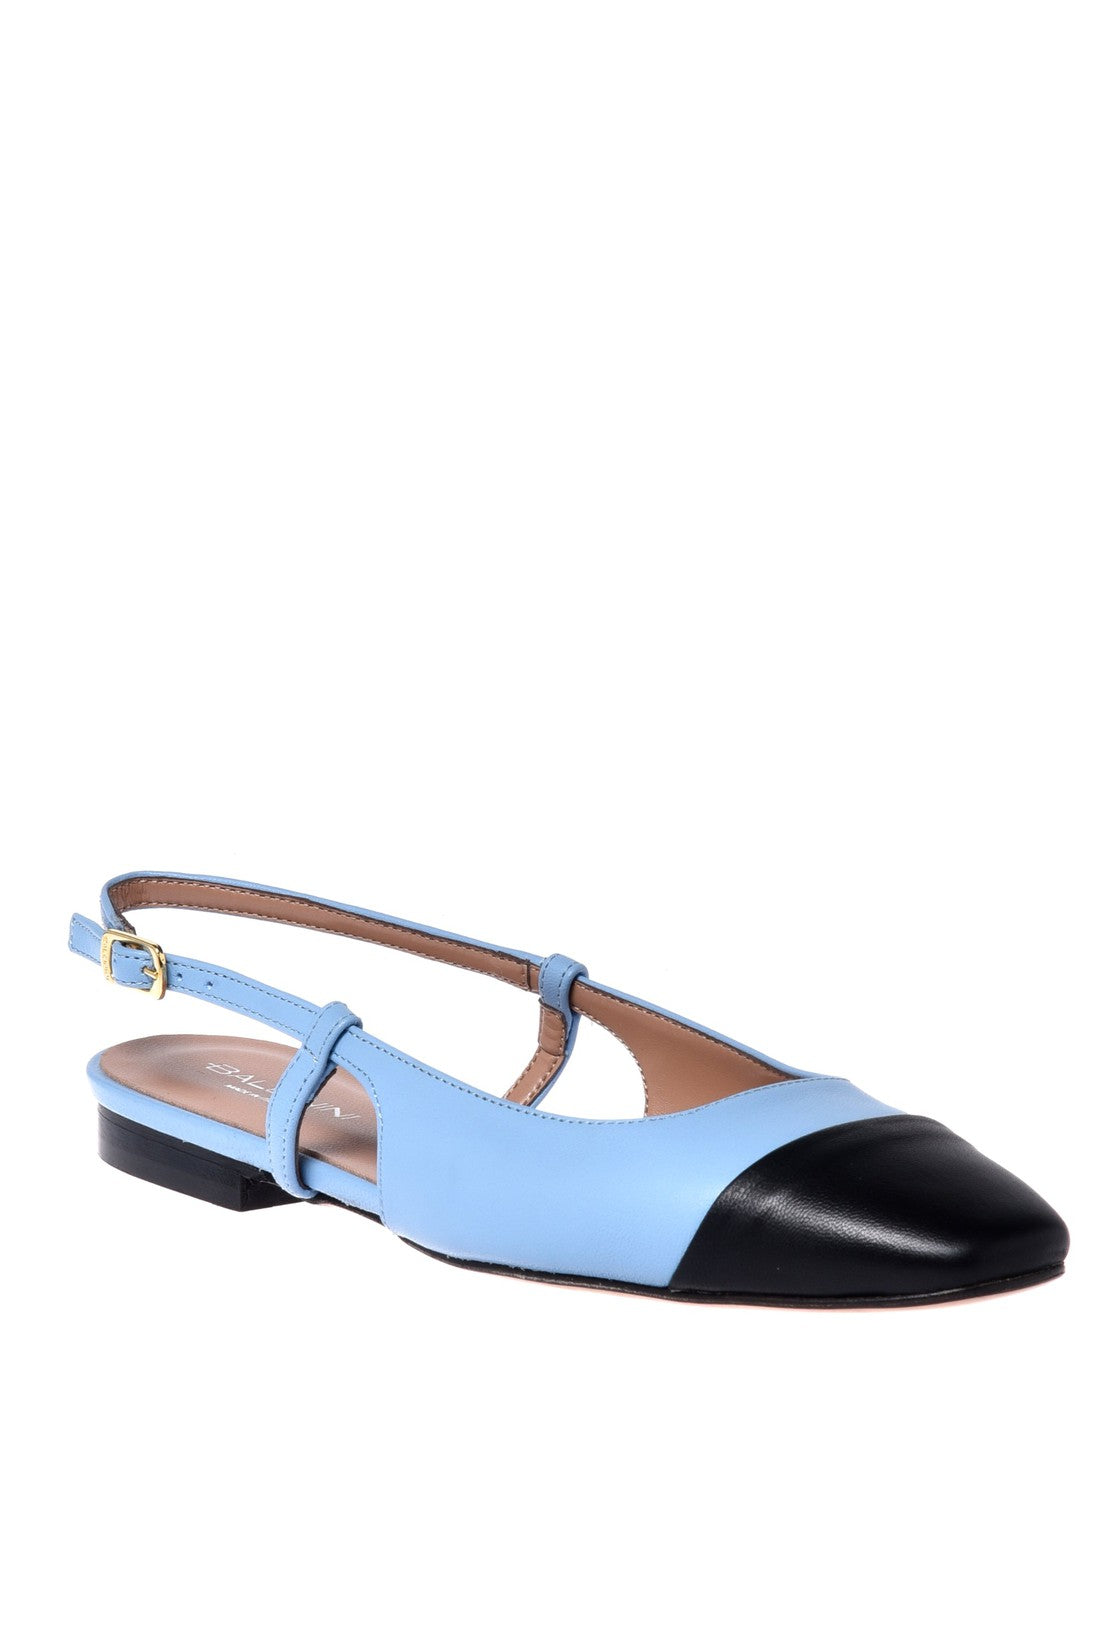 BALDININI-OUTLET-SALE-Ballerina-pump-in-black-and-light-blue-nappa-leather-Halbschuhe-35-ARCHIVE-COLLECTION.jpg